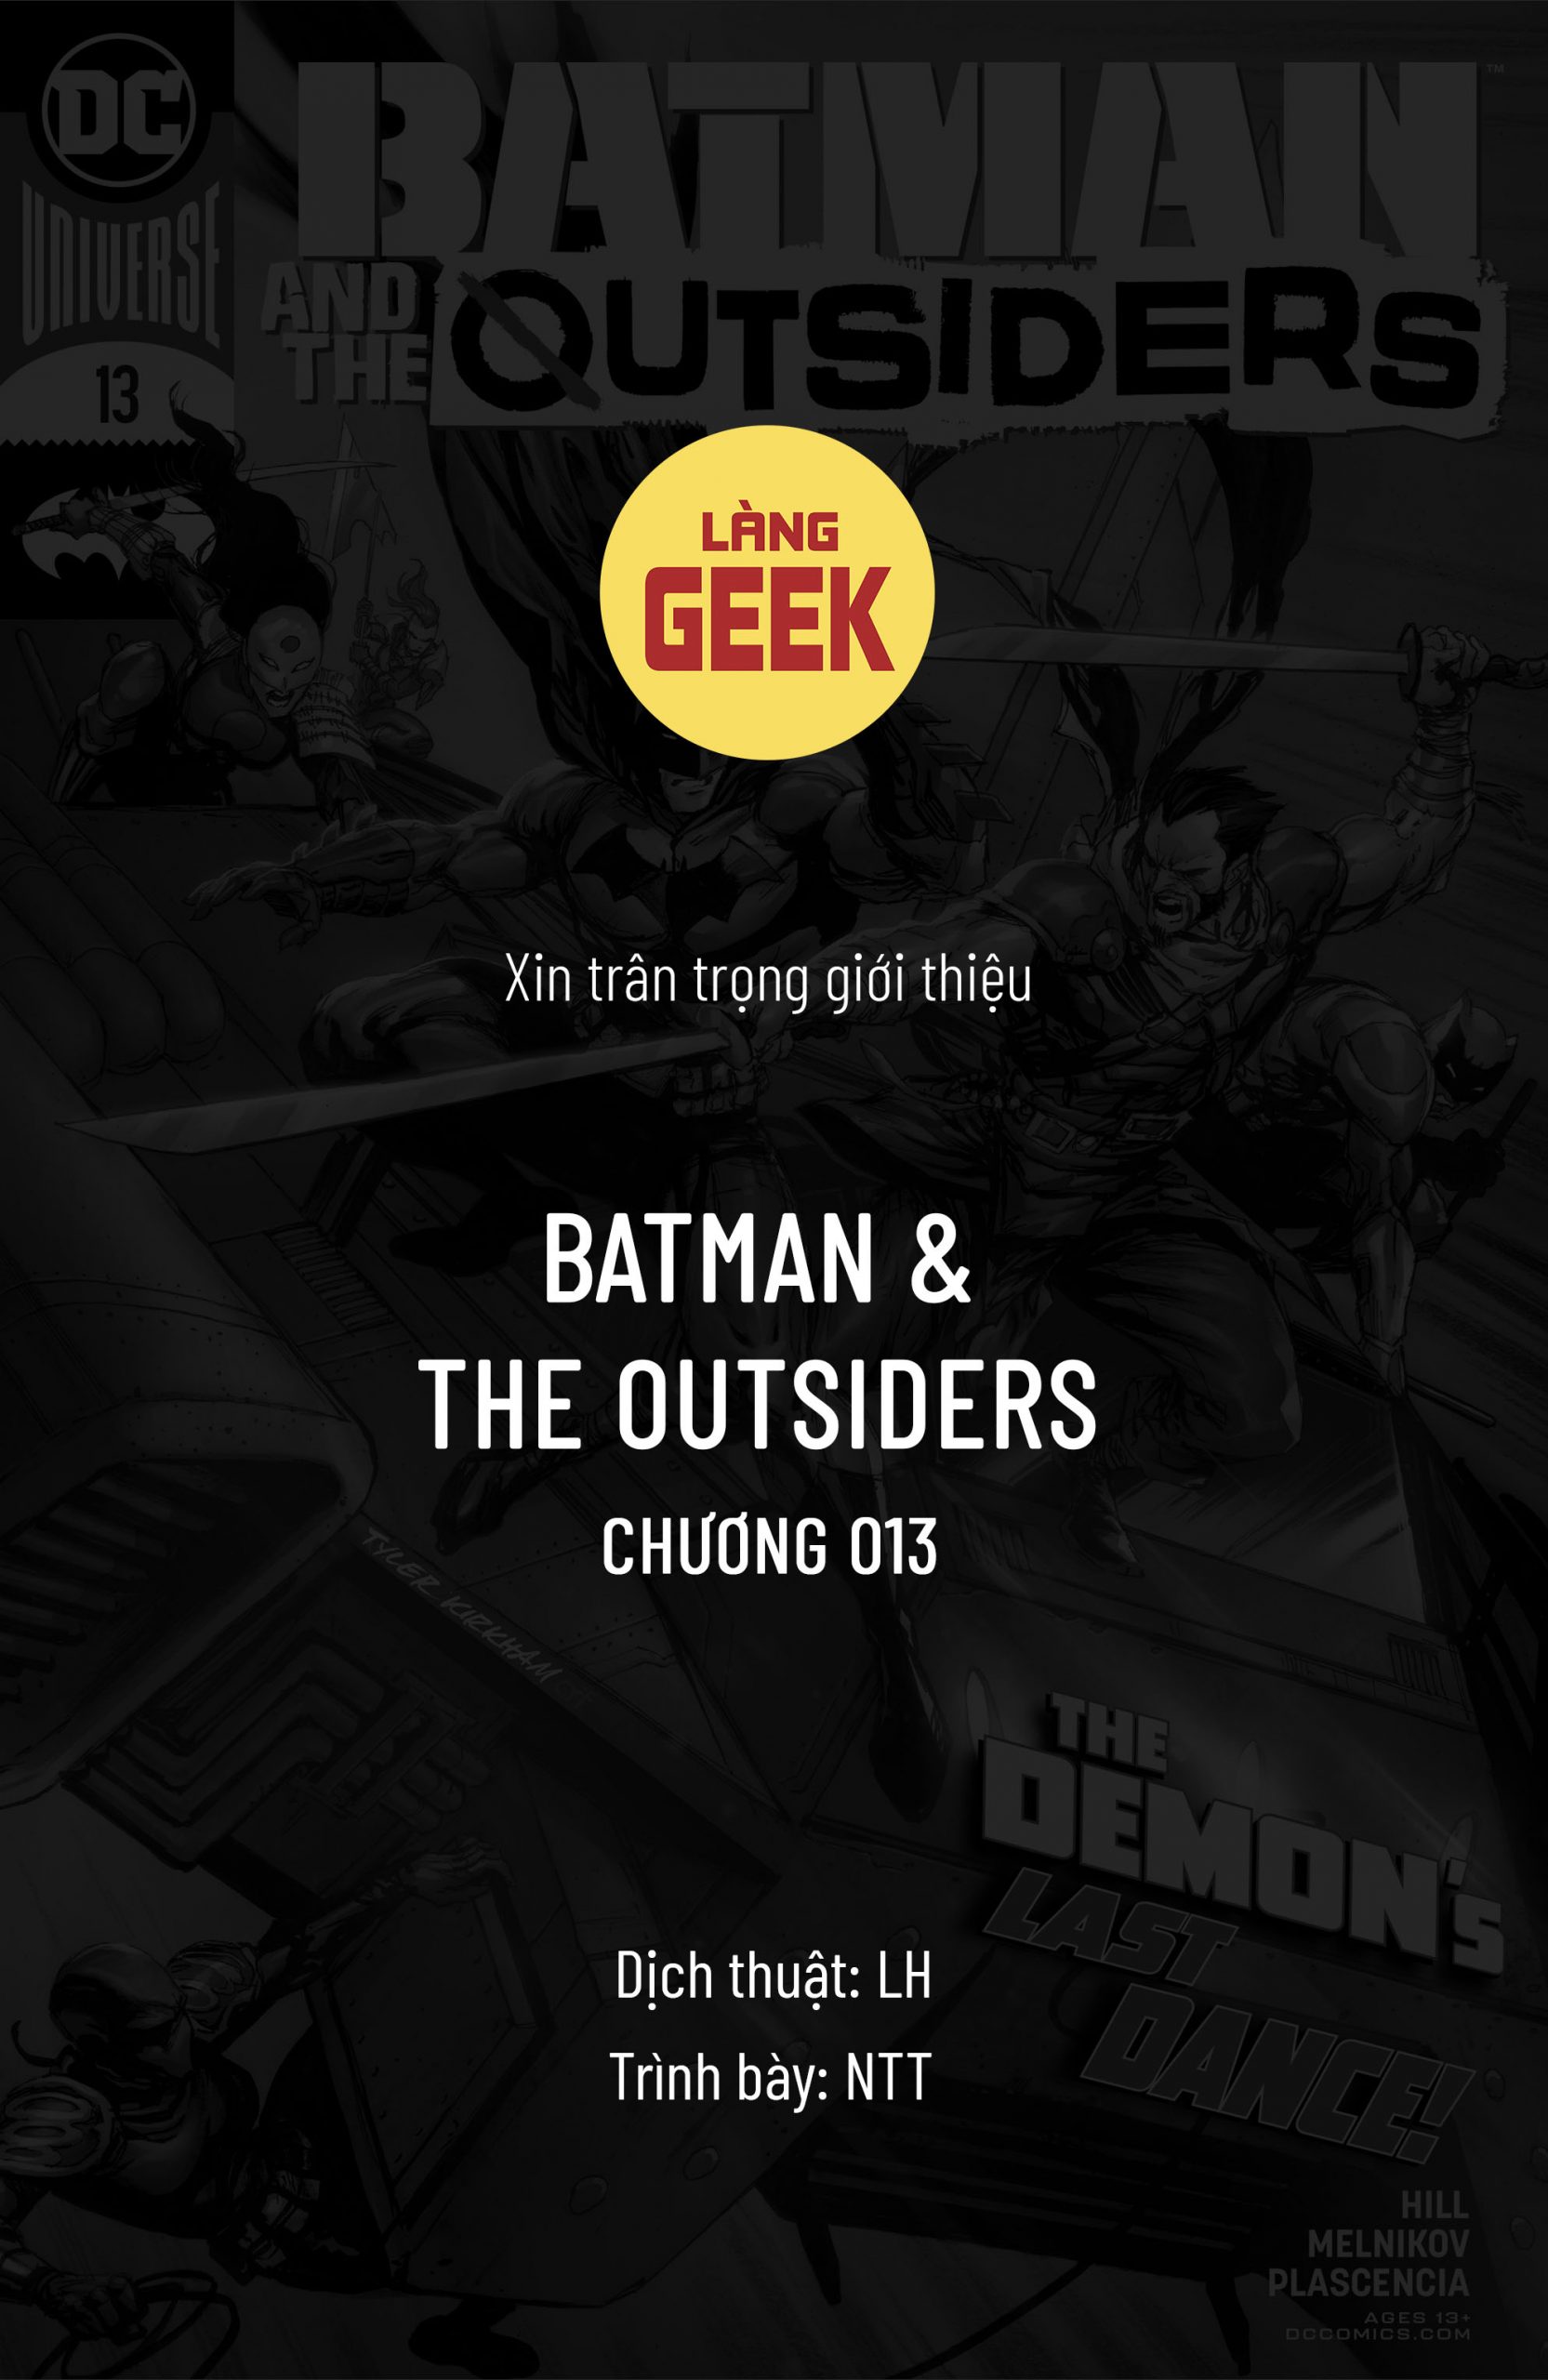 https://langgeek.net/wp-content/uploads/2021/12/Batman-and-the-Outsiders-013-001-scaled.jpg